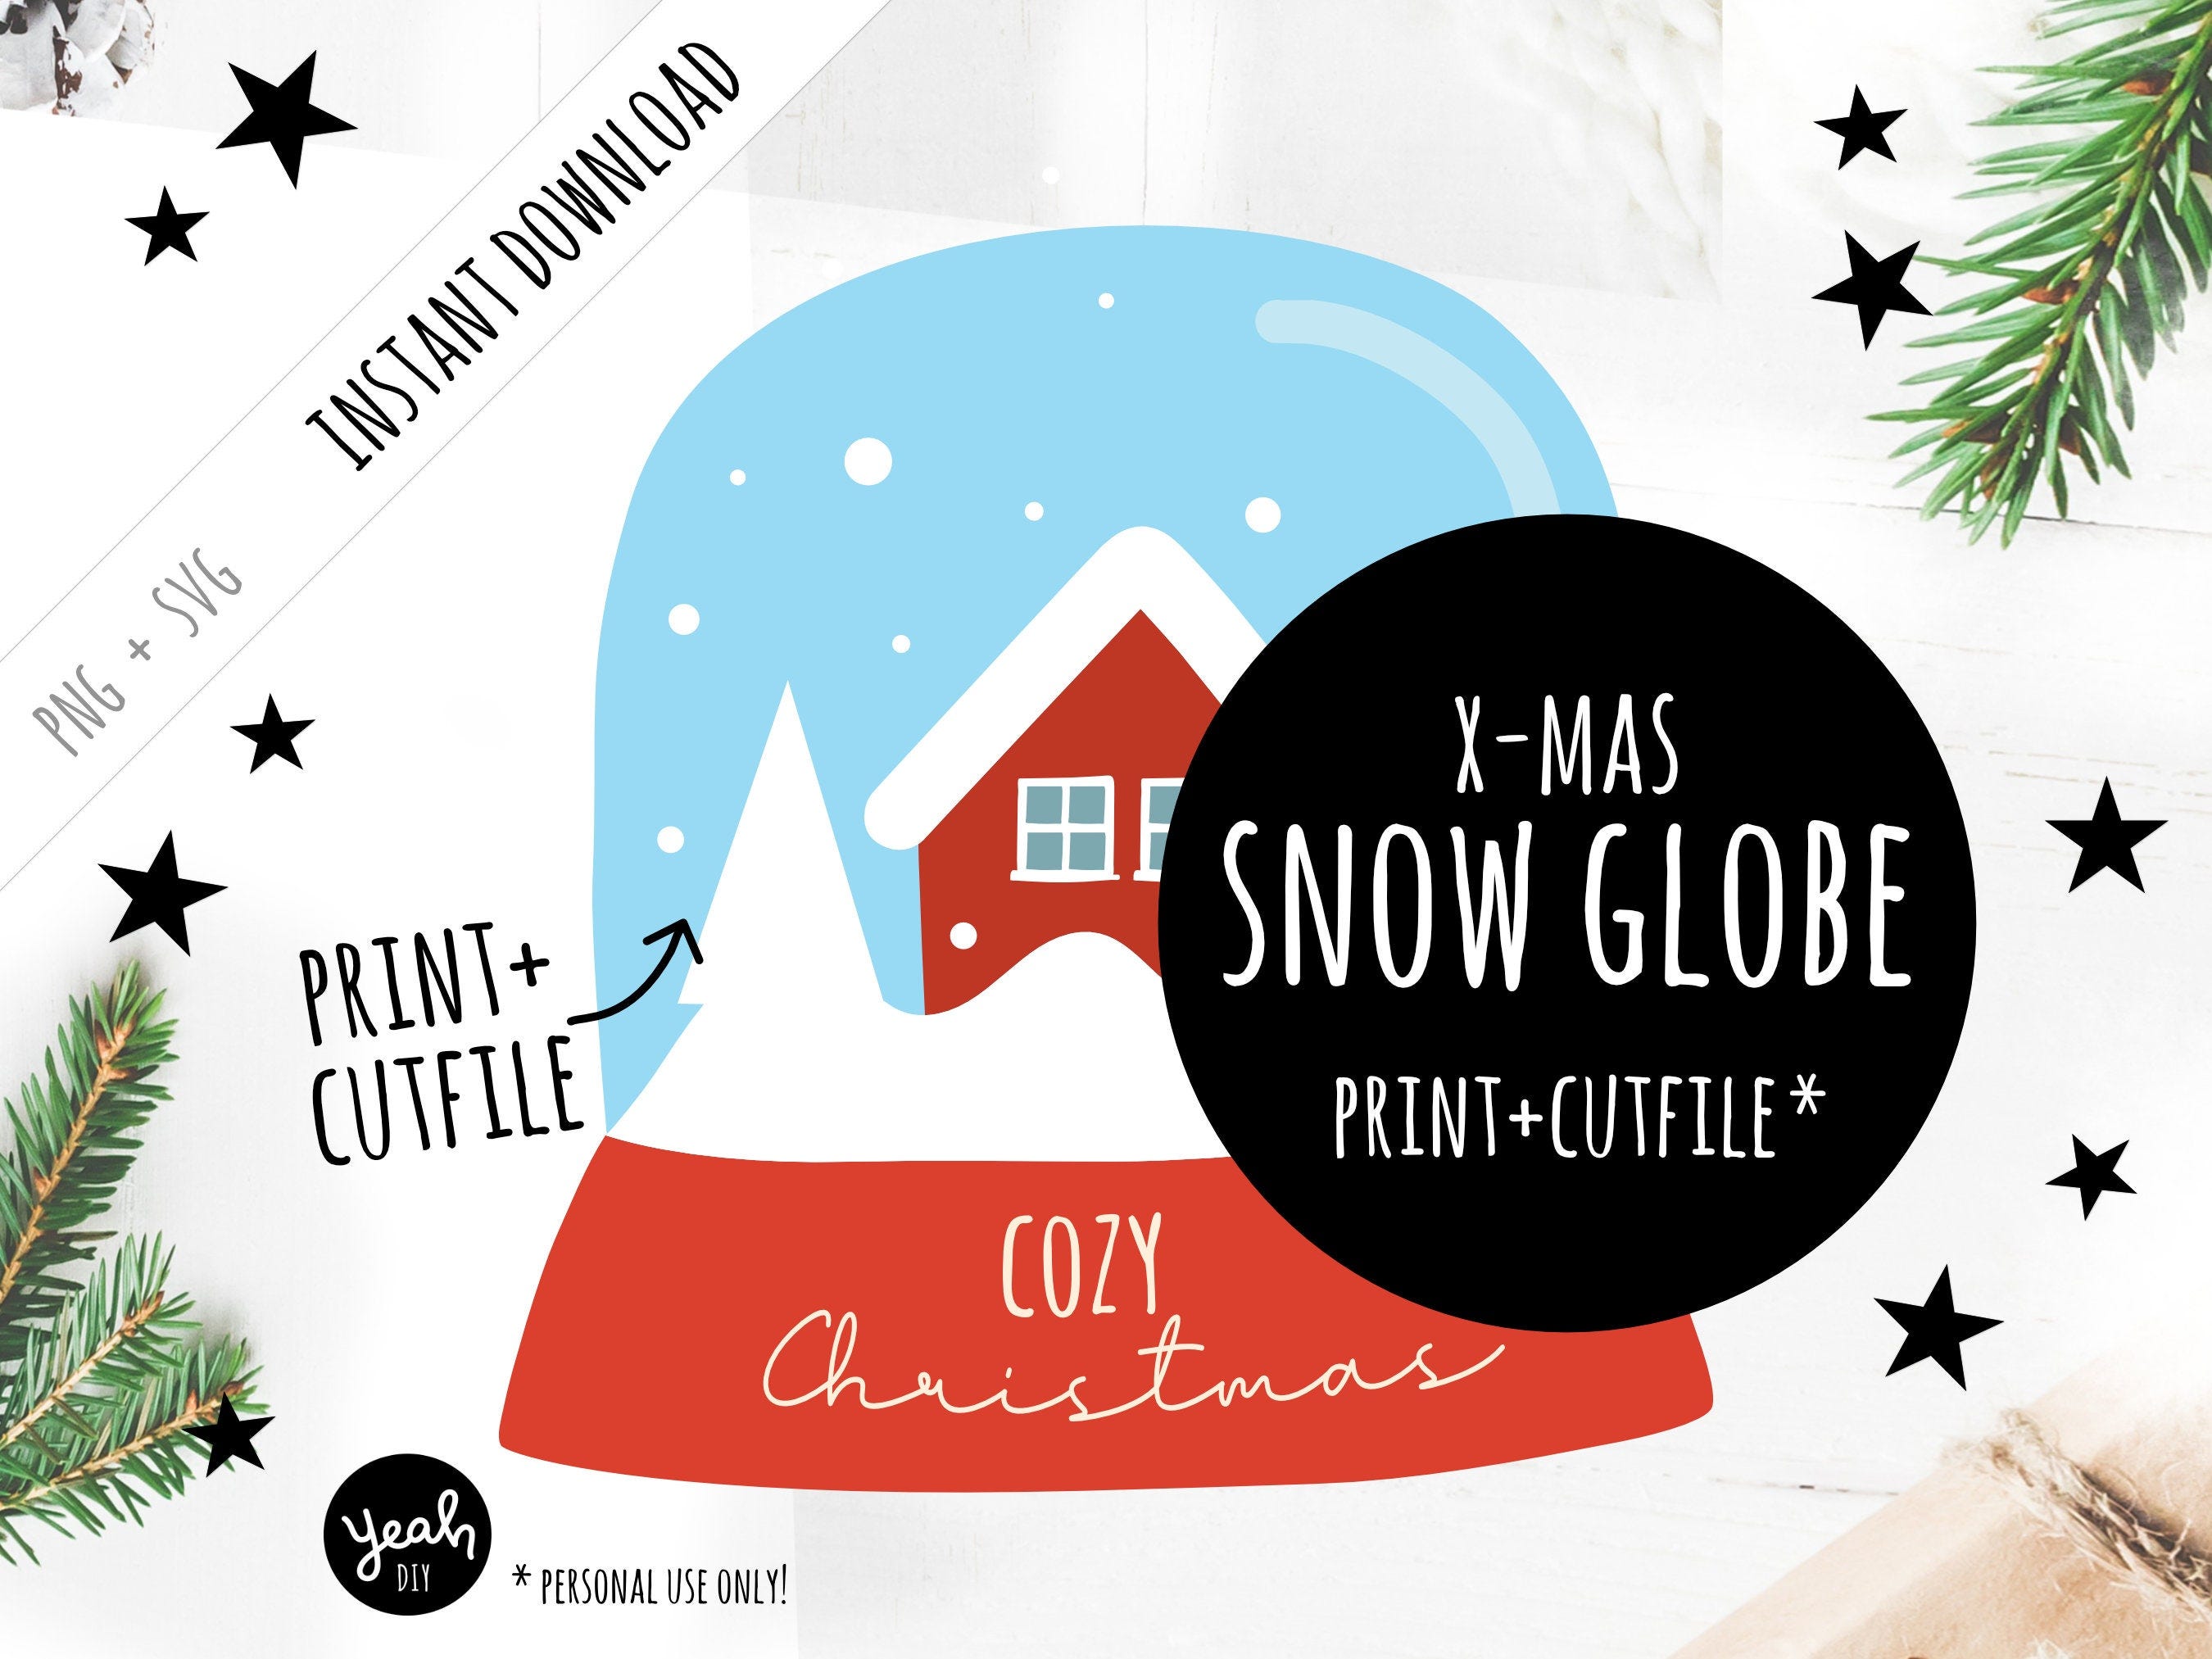 Christmas snow globe with house + fir trees winter landscape: DIY clipart vector template (SVG + PNG) download for printing, flex foil + plotter